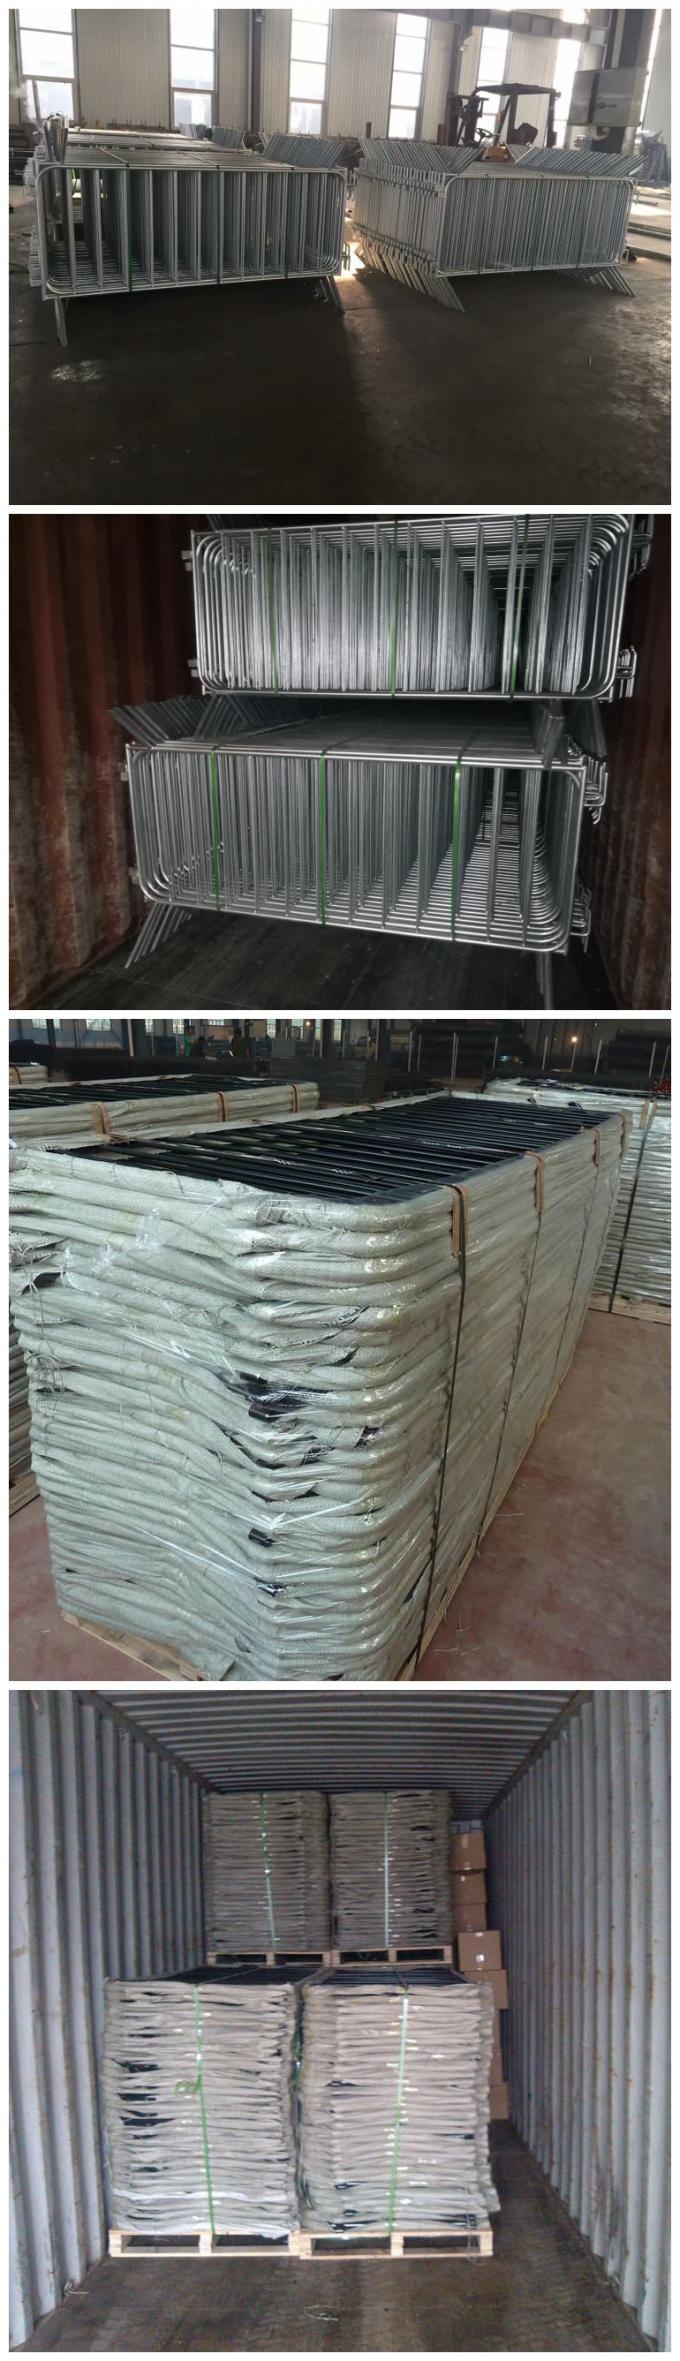 Manufacturer Removable Galvanized Crowd Control Barrier